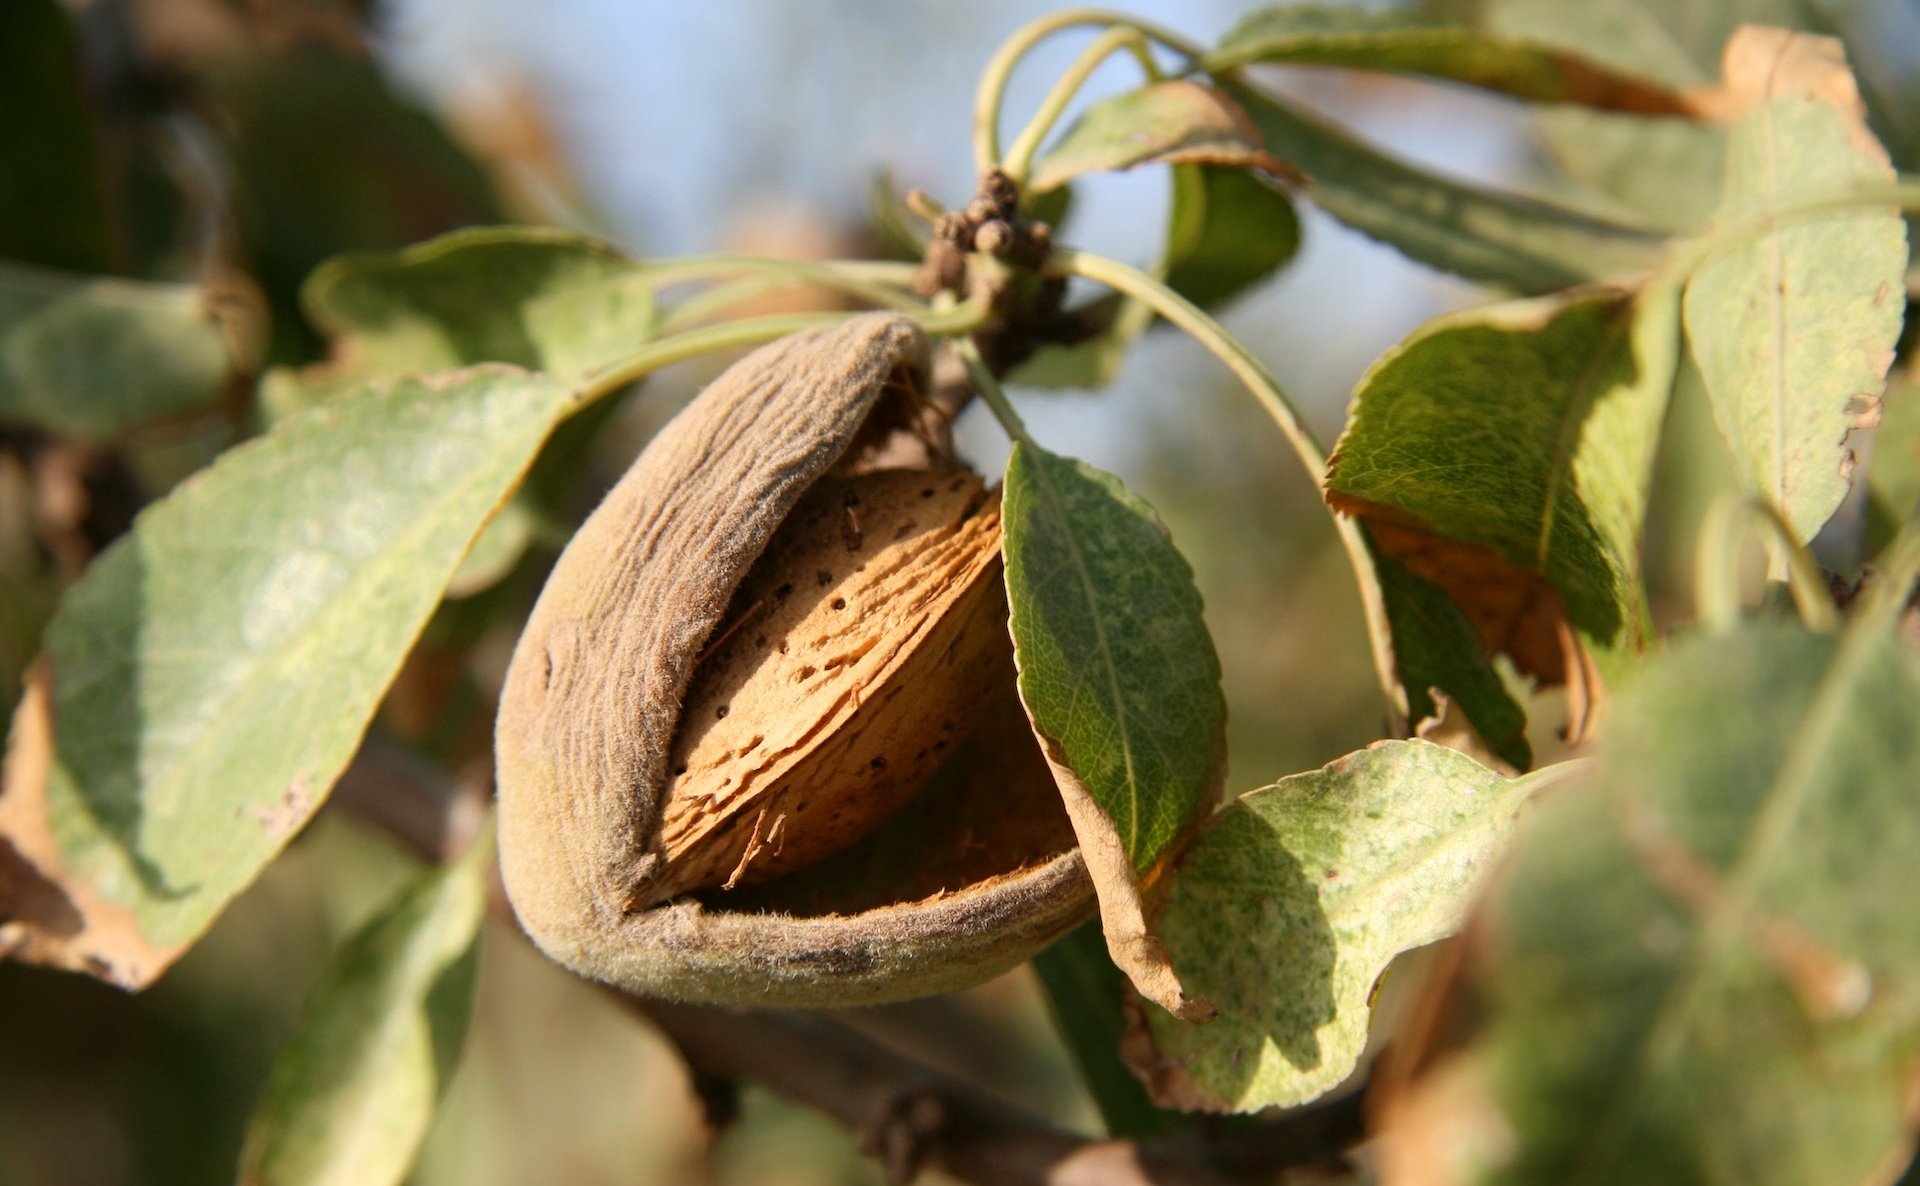 Alternative Investing With Purpose And High RoI: Organic Almond Farming